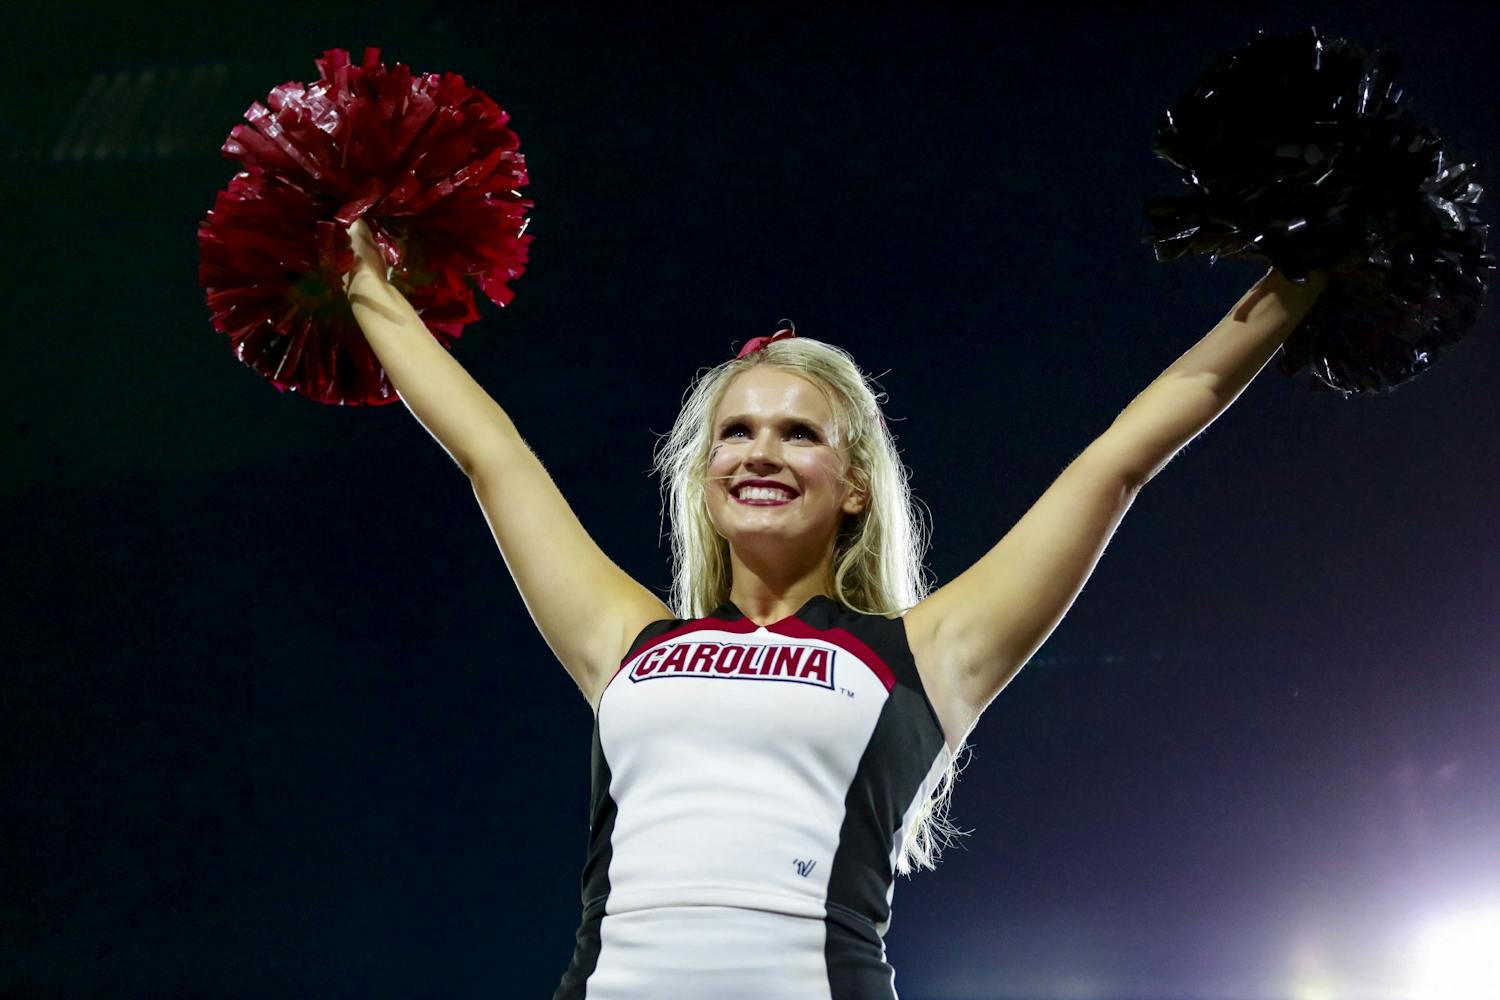 A Gamecock cheerleader performs a stunt during South Carolina's game against Georgia on September 18, 2021.